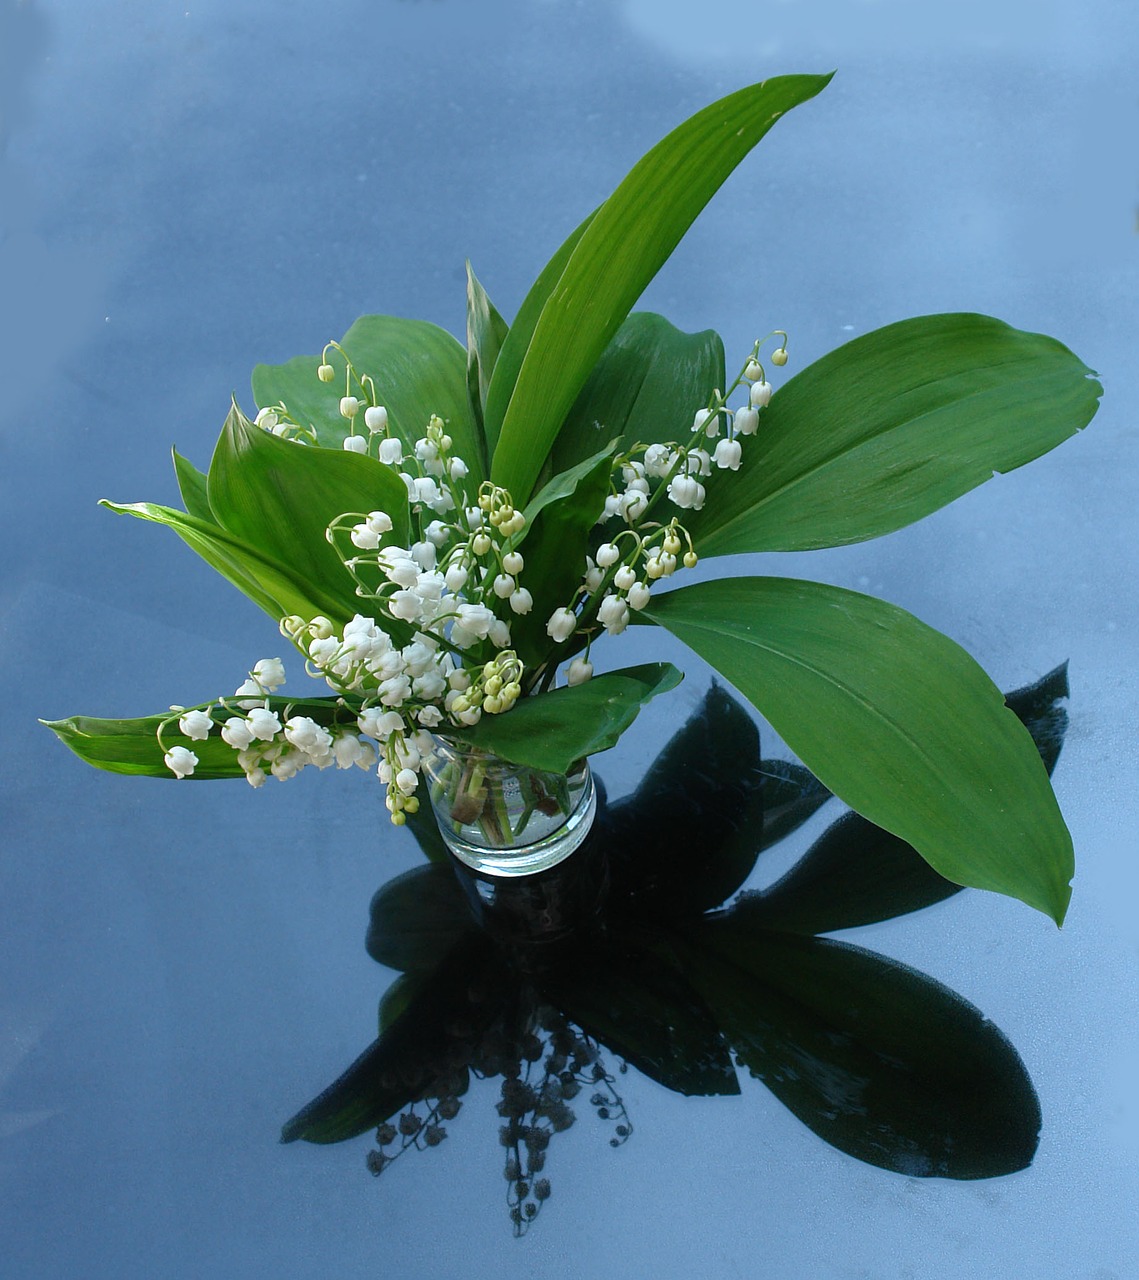 lily of the valley plant garden free photo